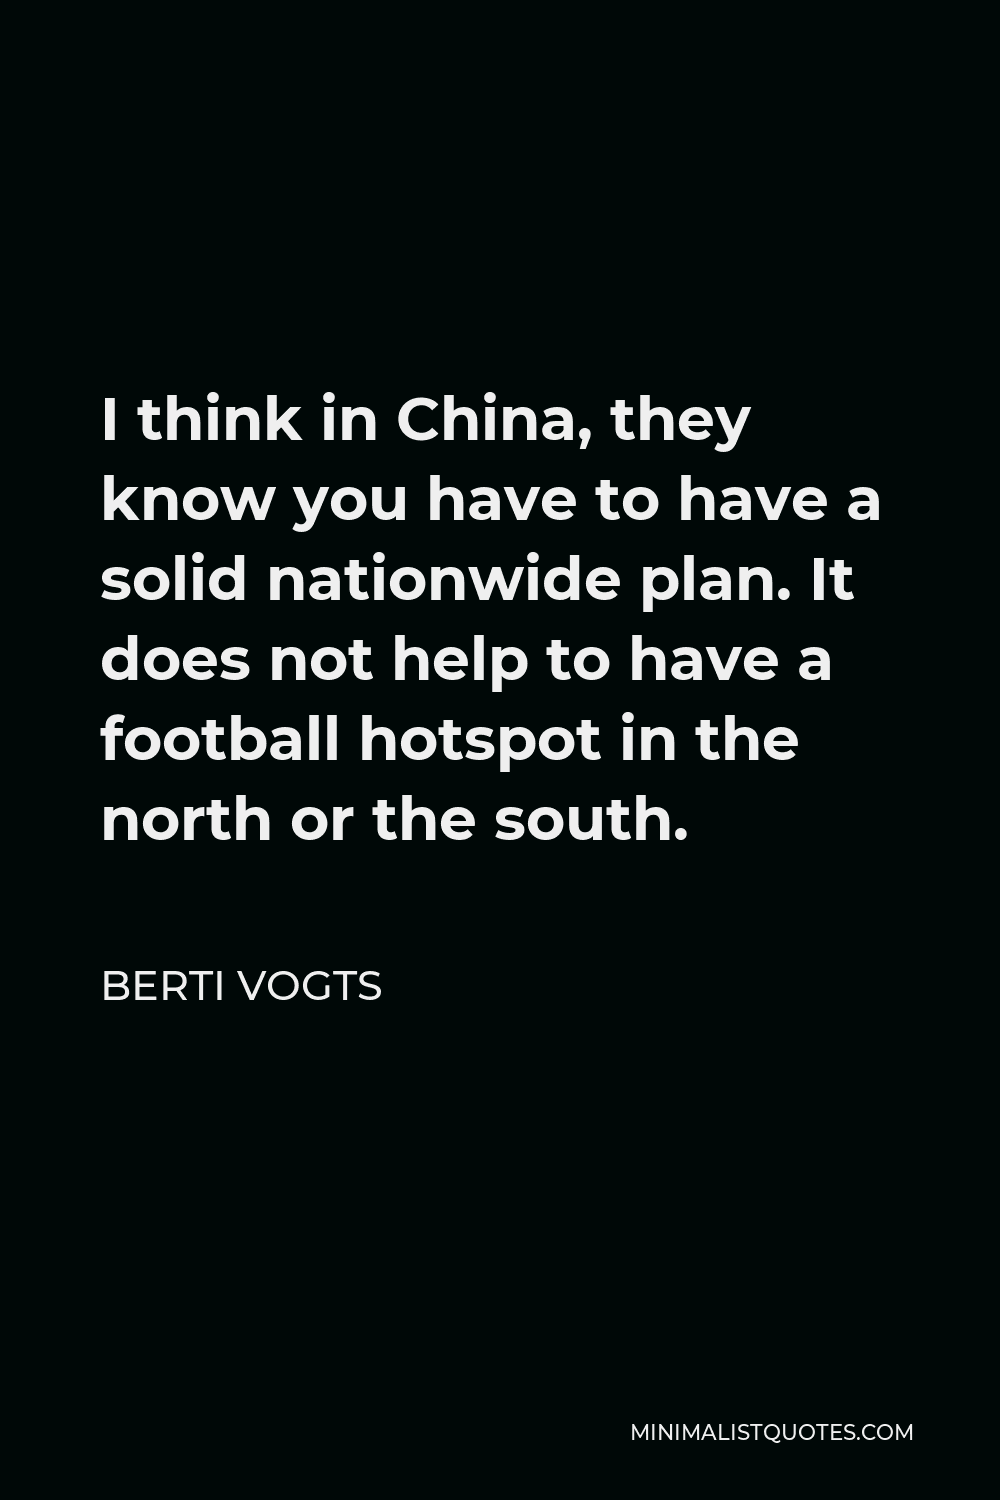 Berti Vogts Quote - I think in China, they know you have to have a solid nationwide plan. It does not help to have a football hotspot in the north or the south.